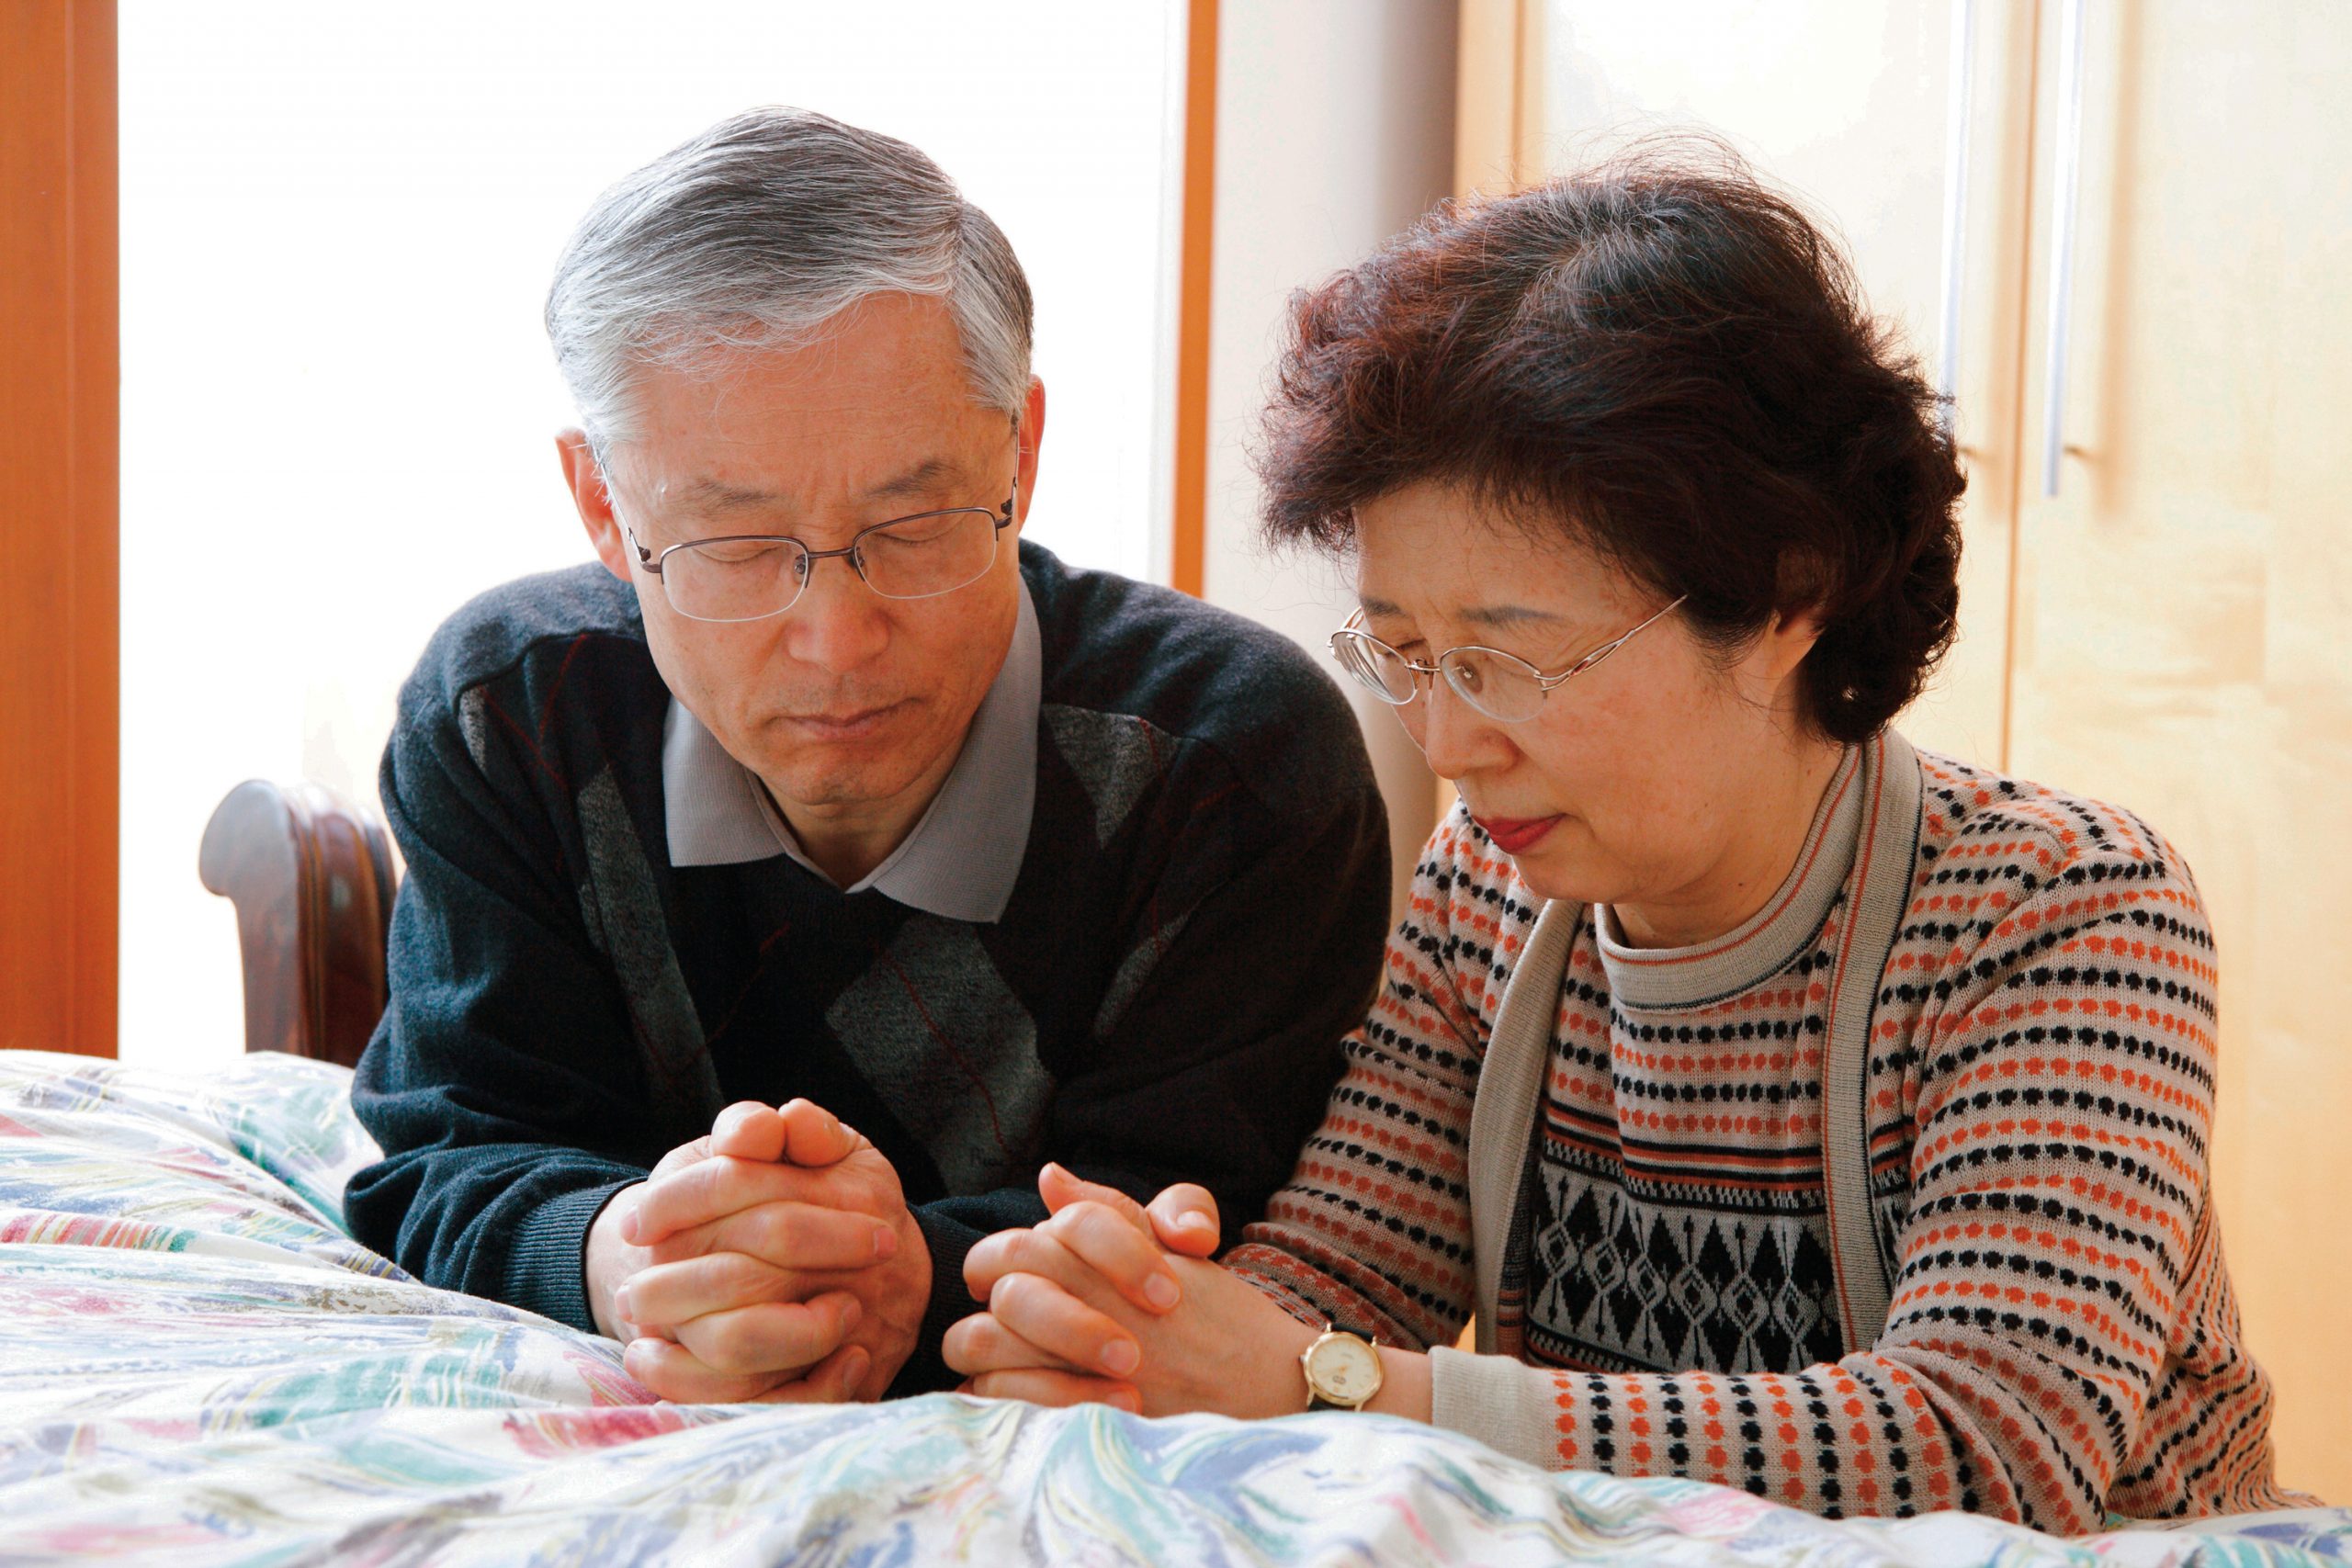 Two people praying together.